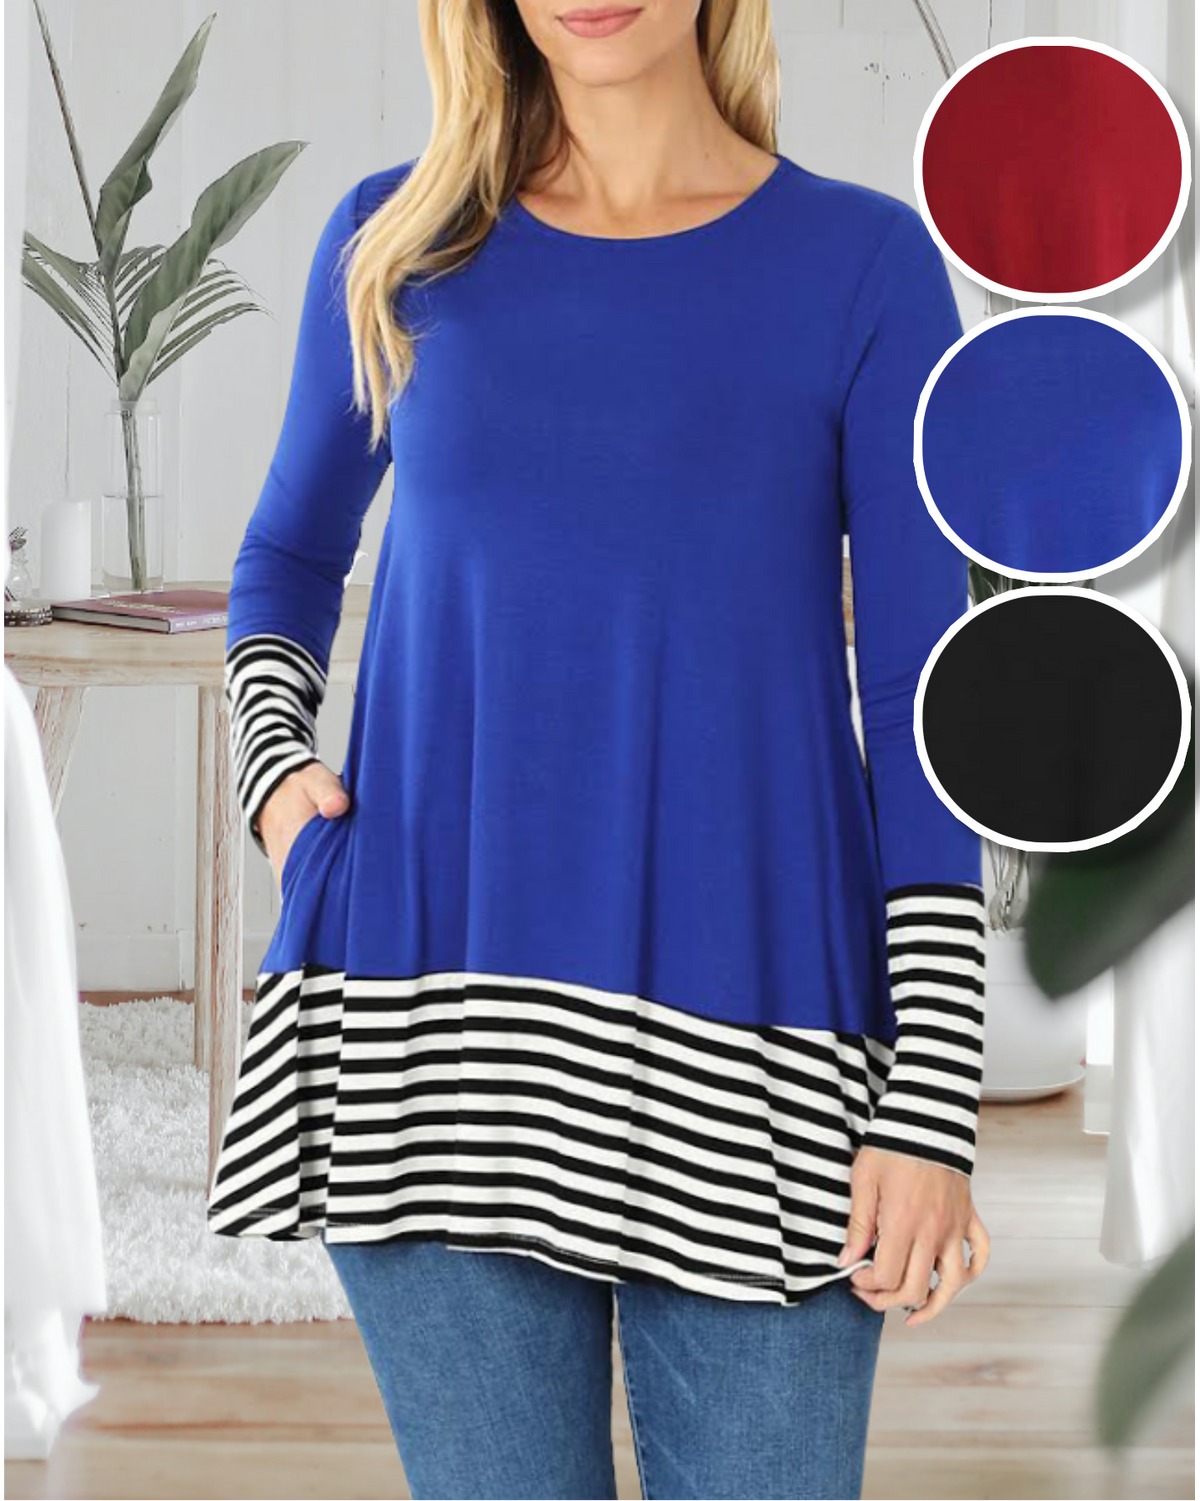 Womens Long Sleeve Tunic Top with Pockets and Black & White Hemline Stripes available in 3 colors